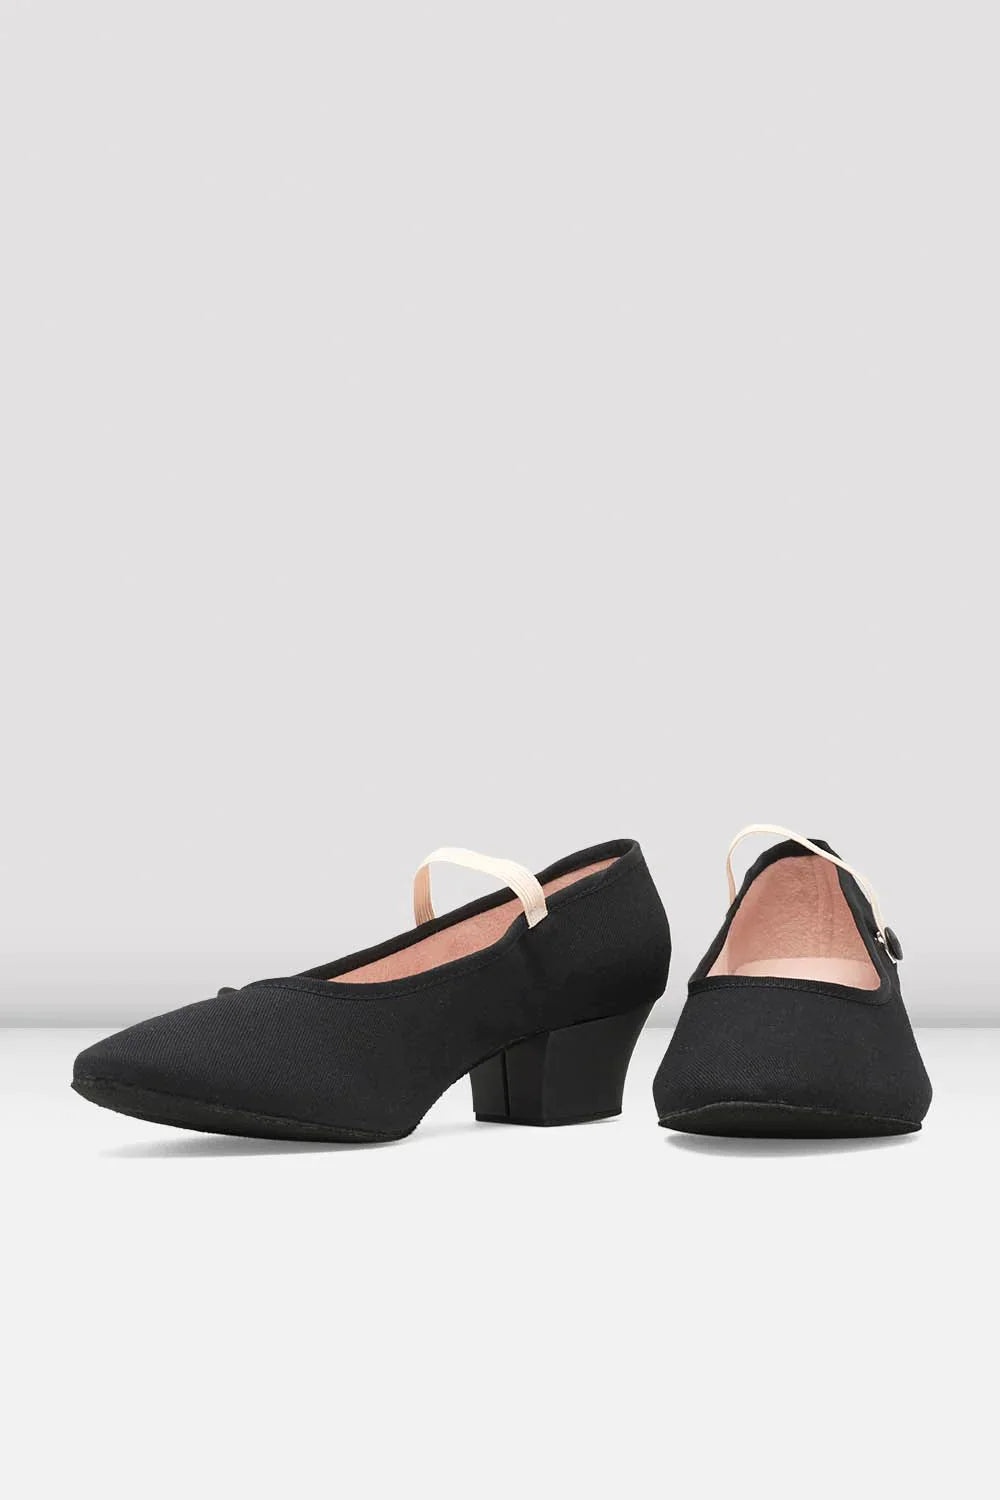 BLOCH TEMPO Adult Cuban Character Shoe